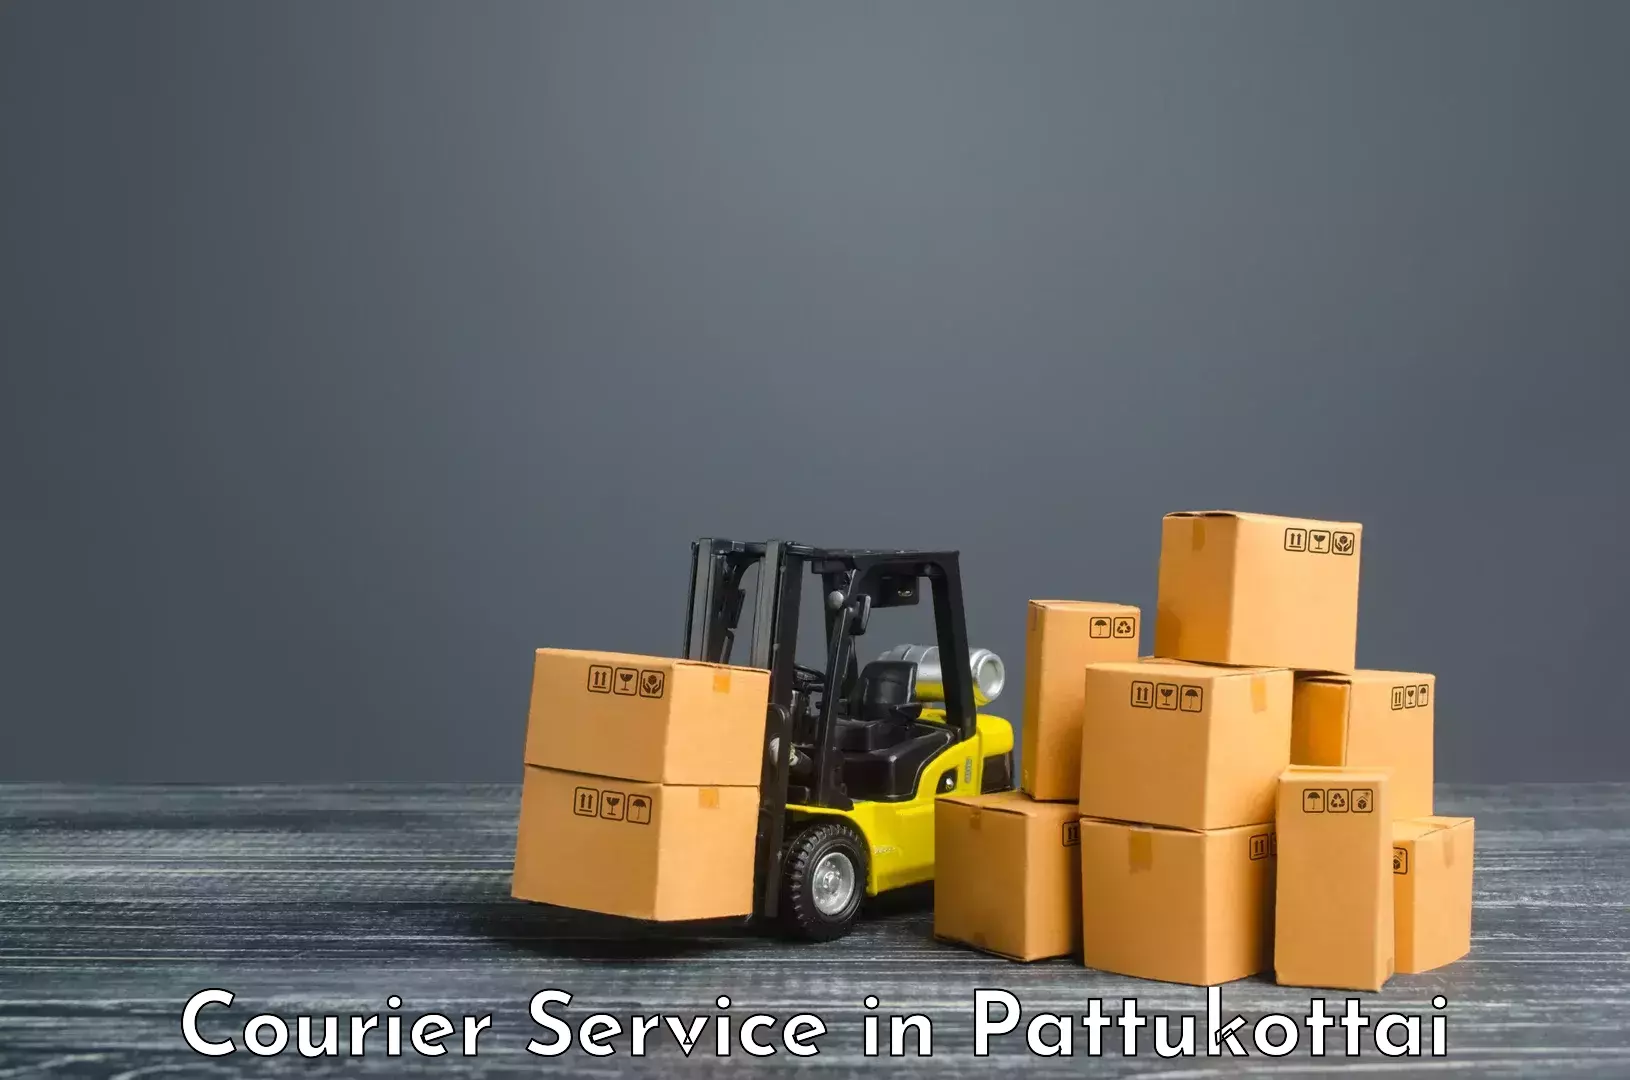 Specialized courier services in Pattukottai